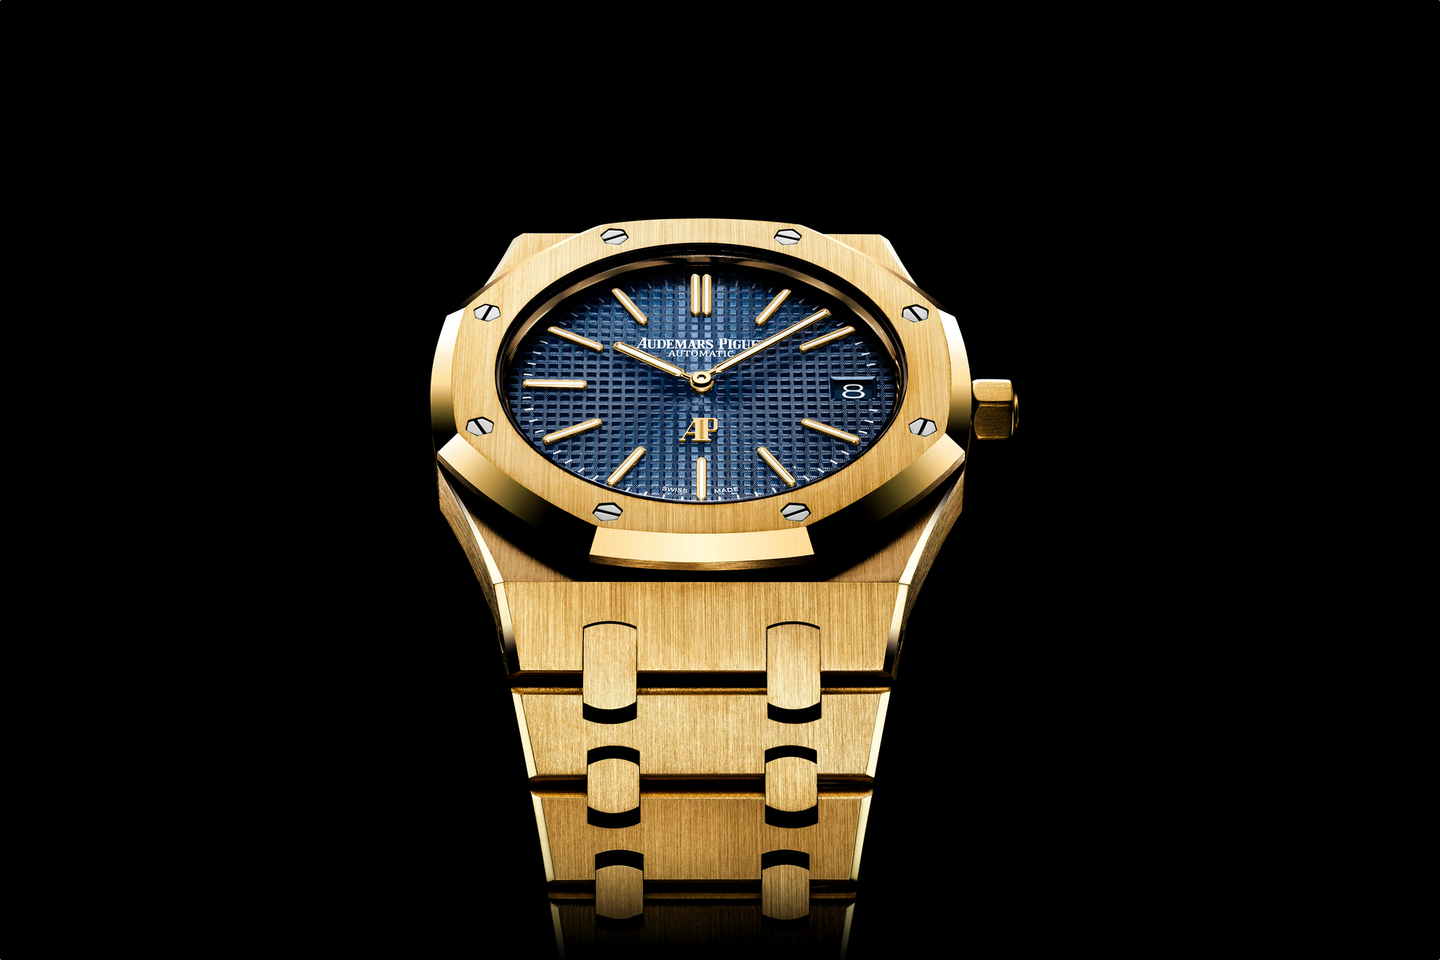 Royal Oak Extra-Thin in yellow gold